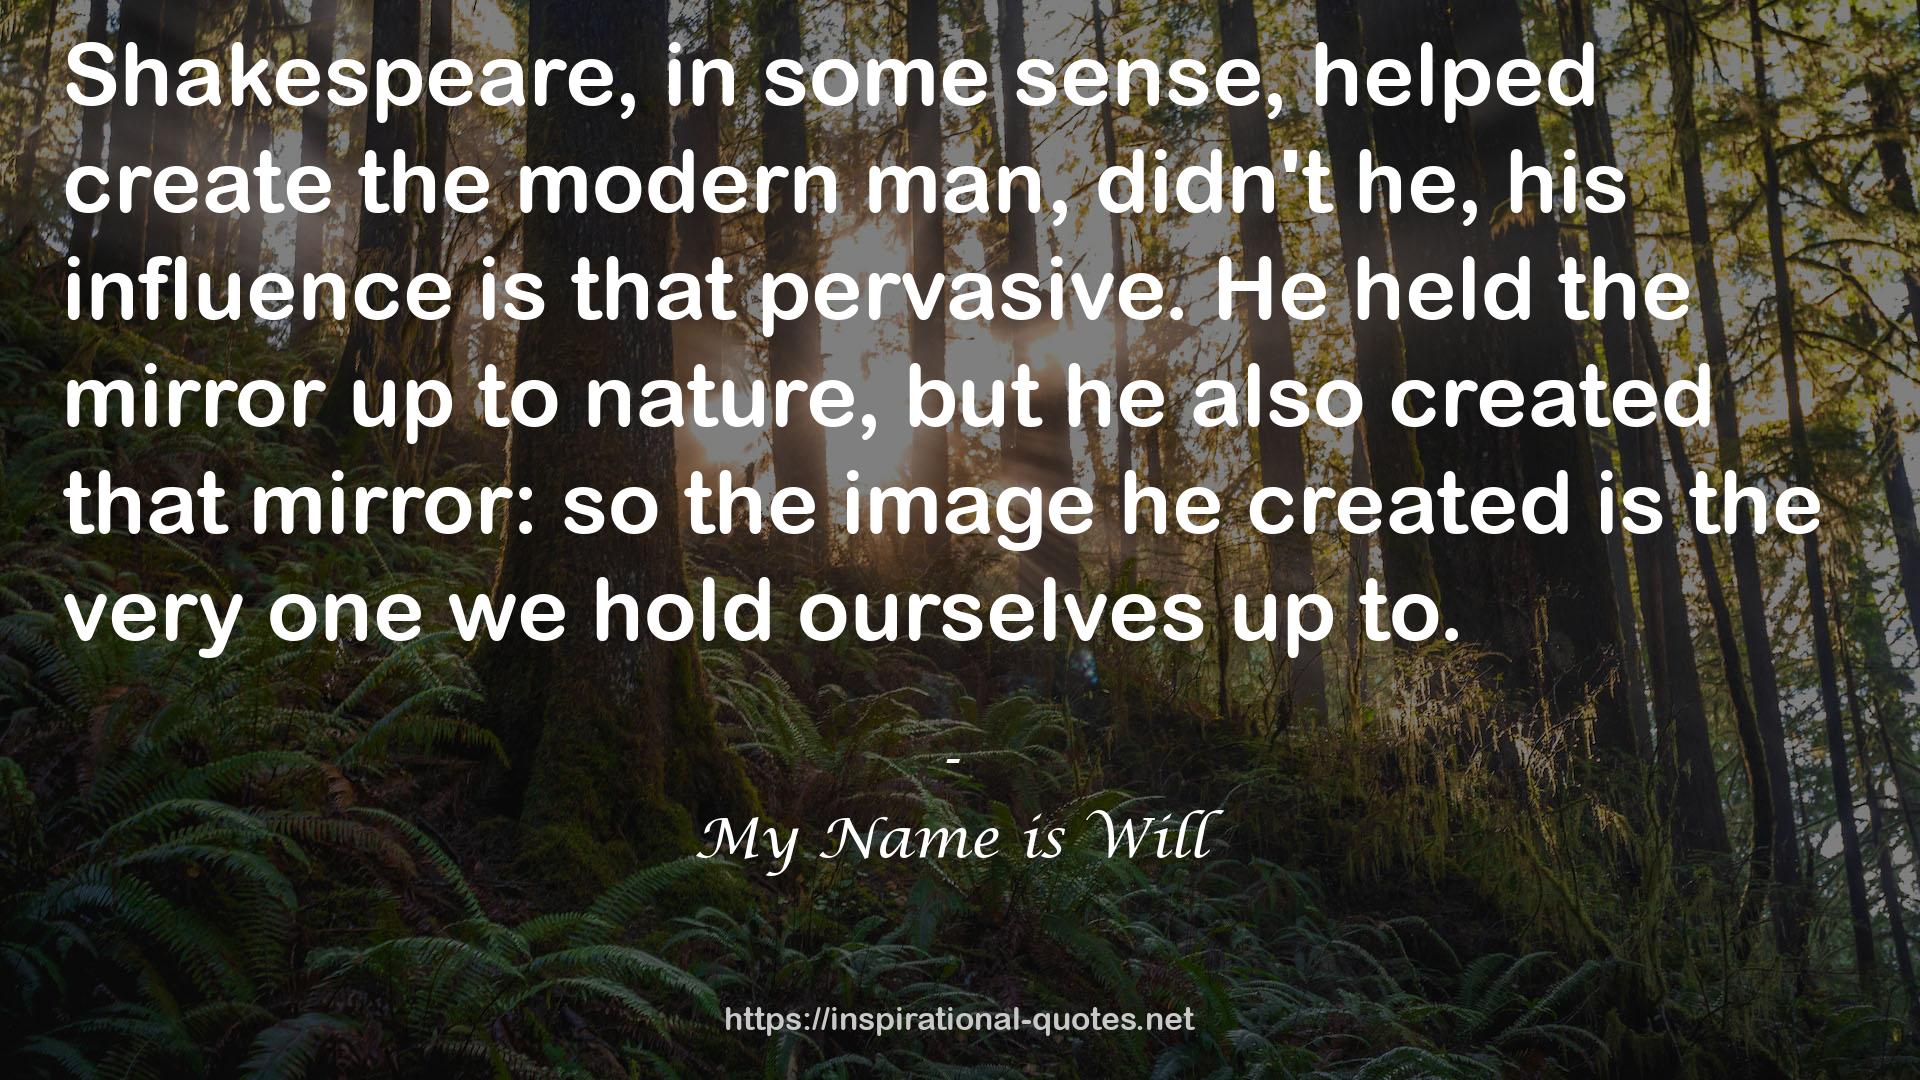 My Name is Will QUOTES